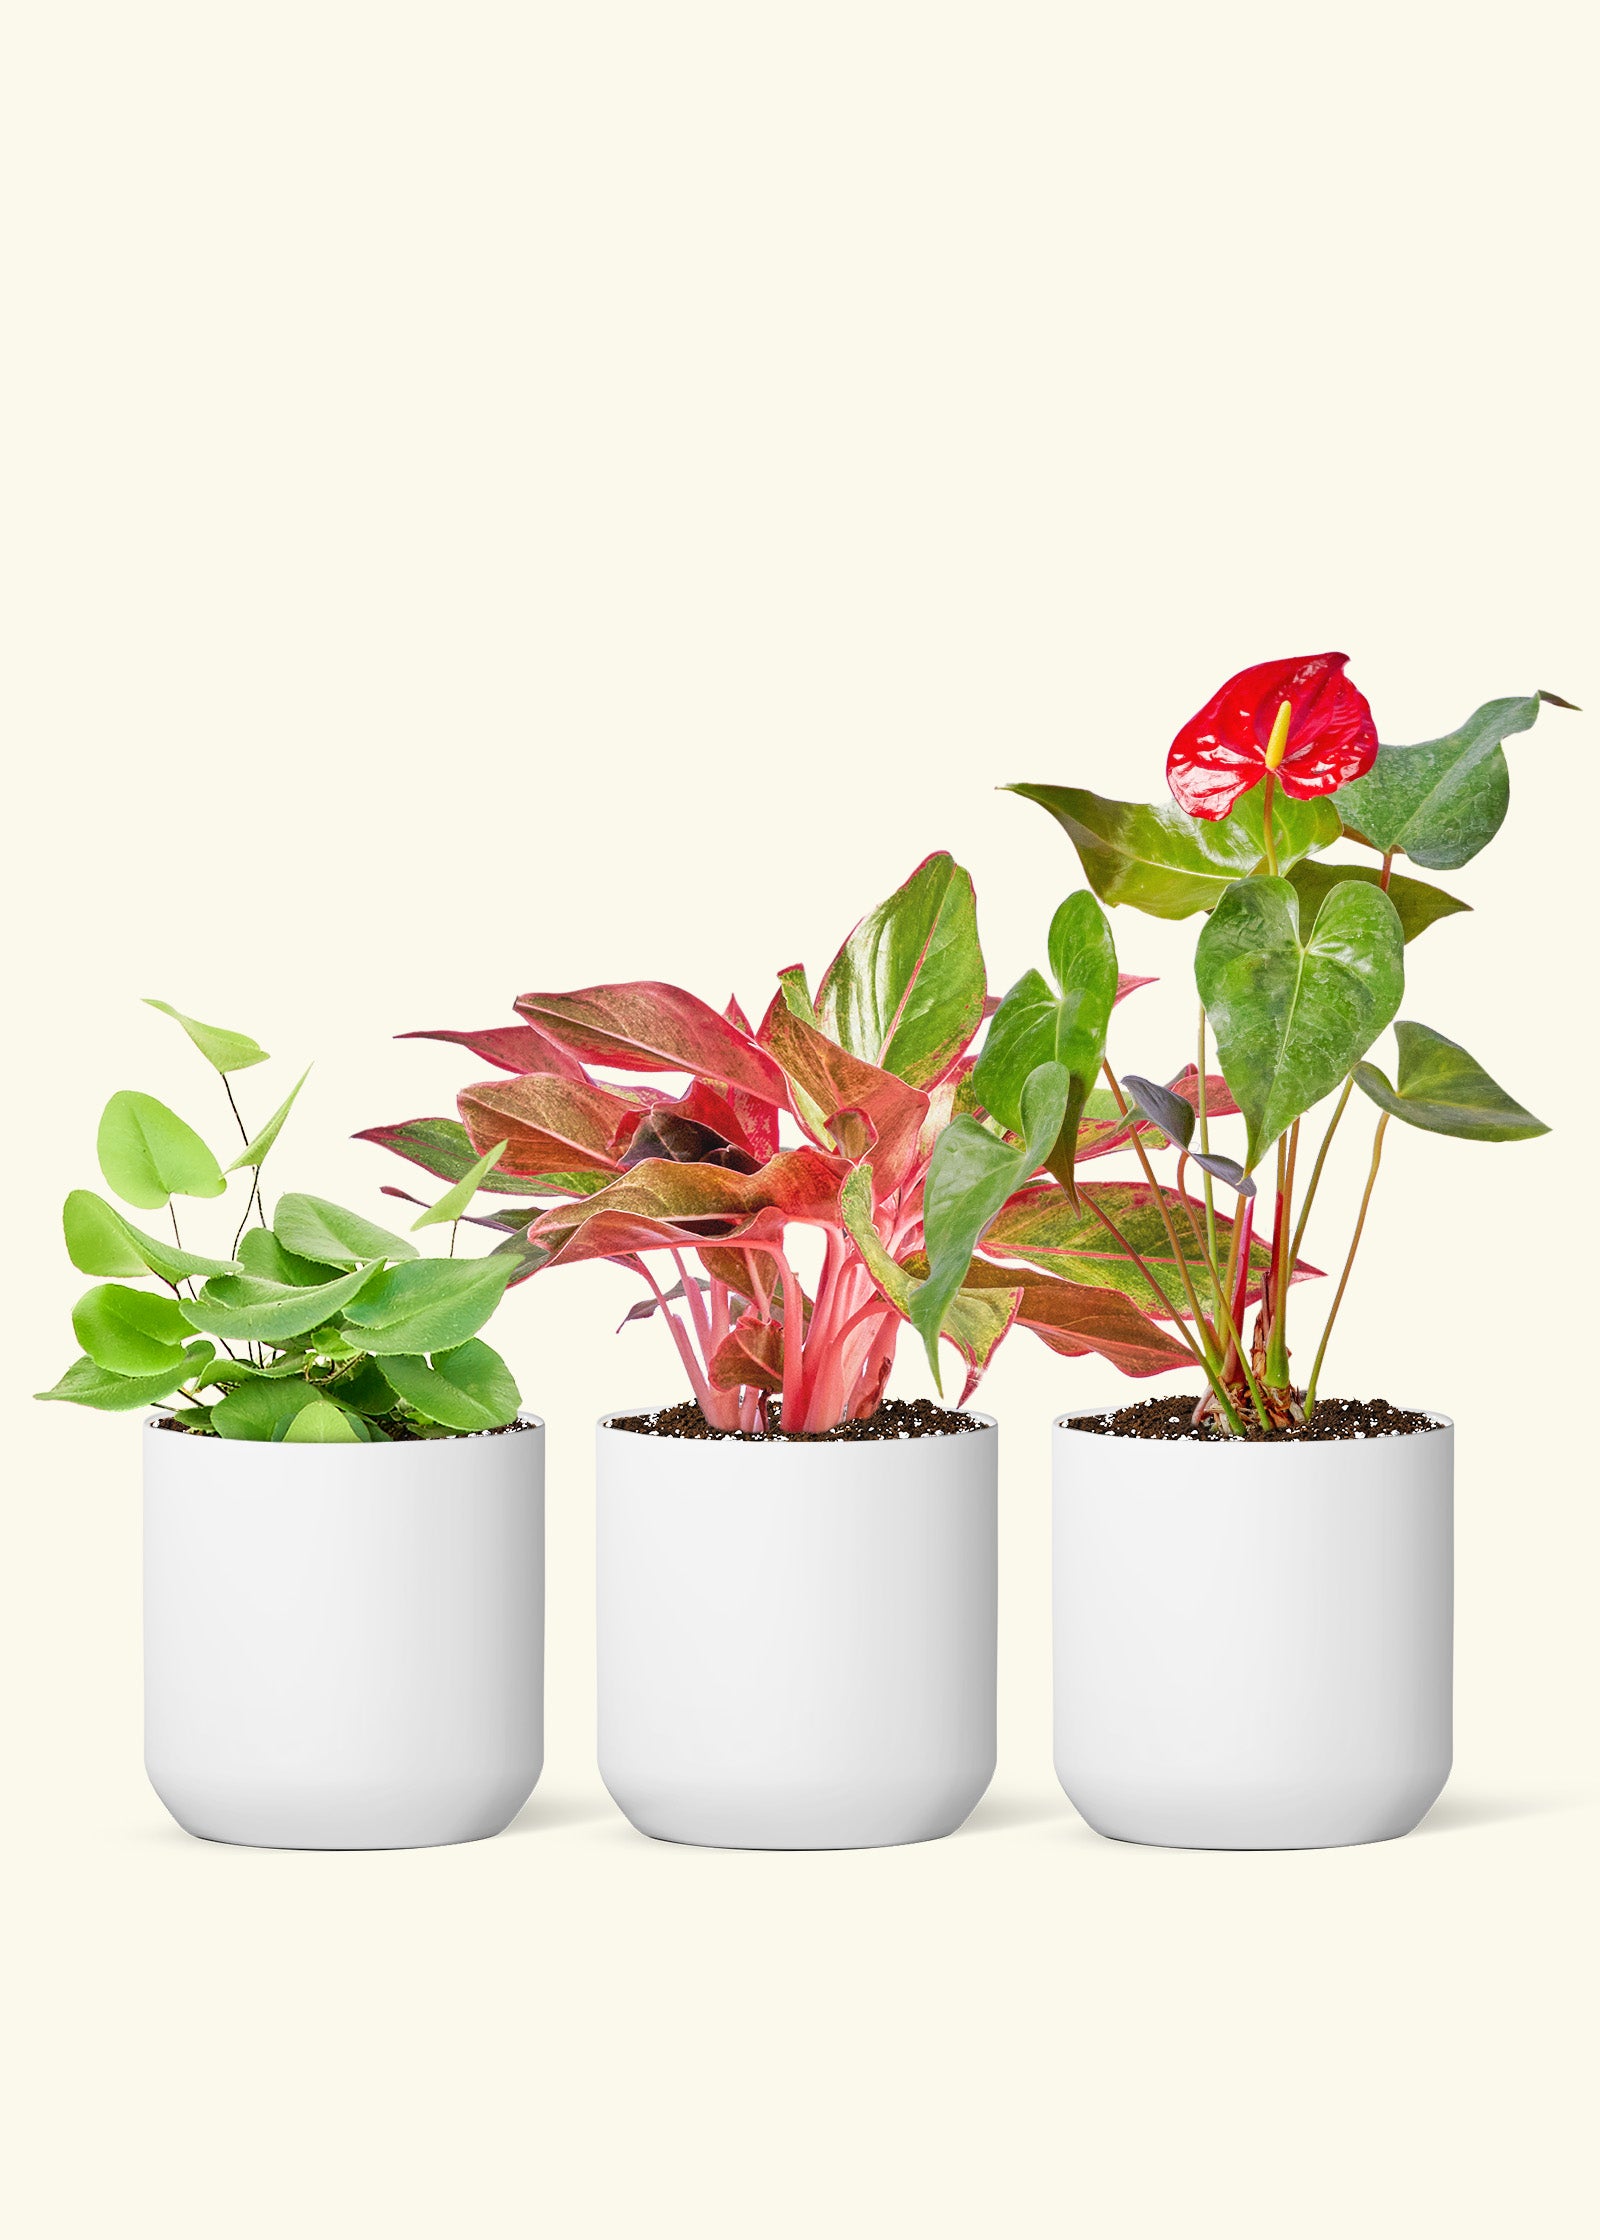 A V-Day Potted Trio - Heartleaf Fern, Aglaonema Creta and Red Anthurium in a White Ceramic Planter Comes with three bags of Organic Potting Mix